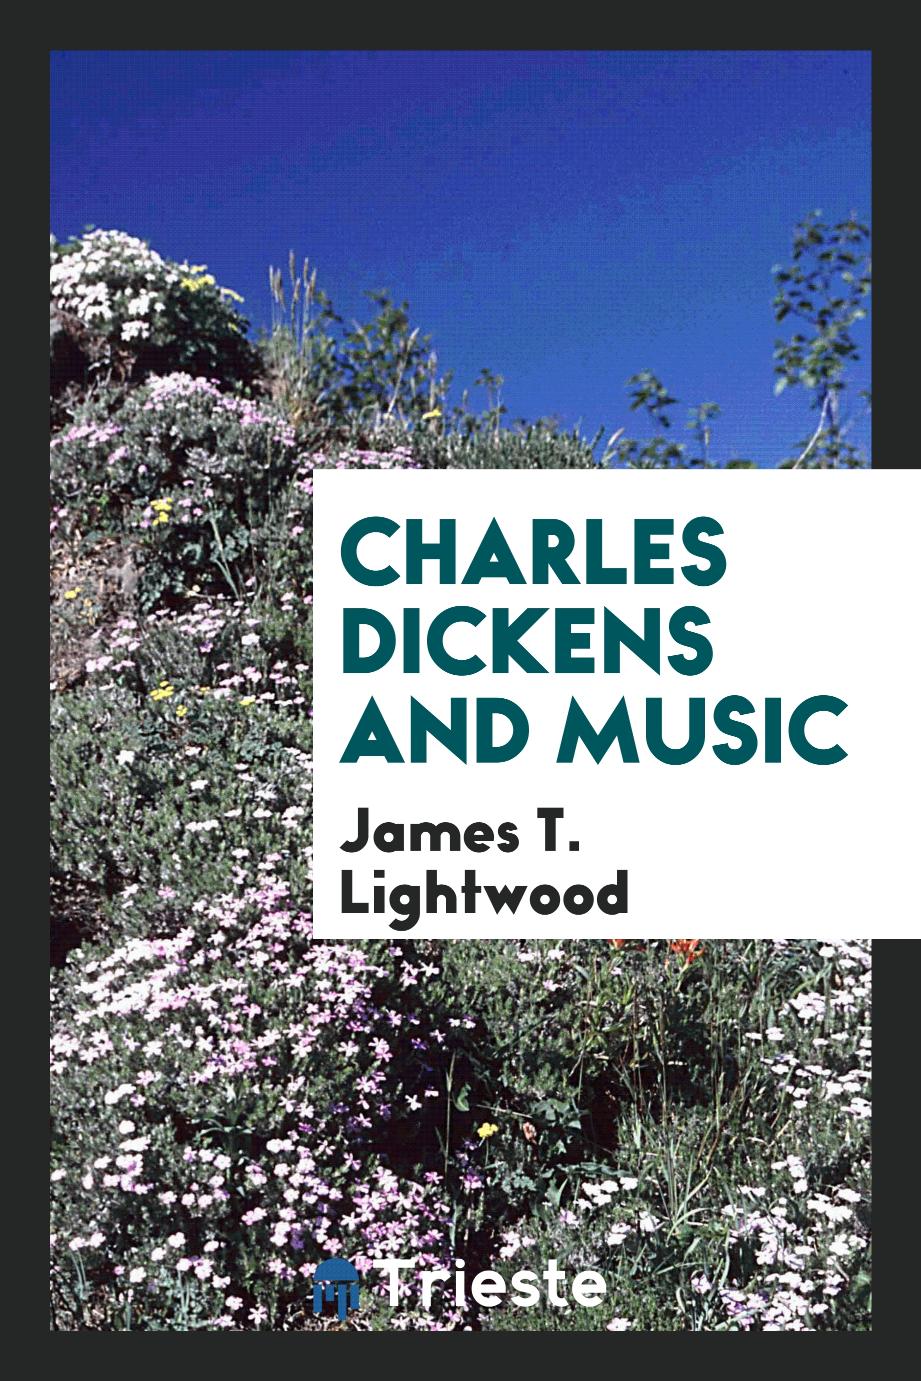 Charles Dickens and music